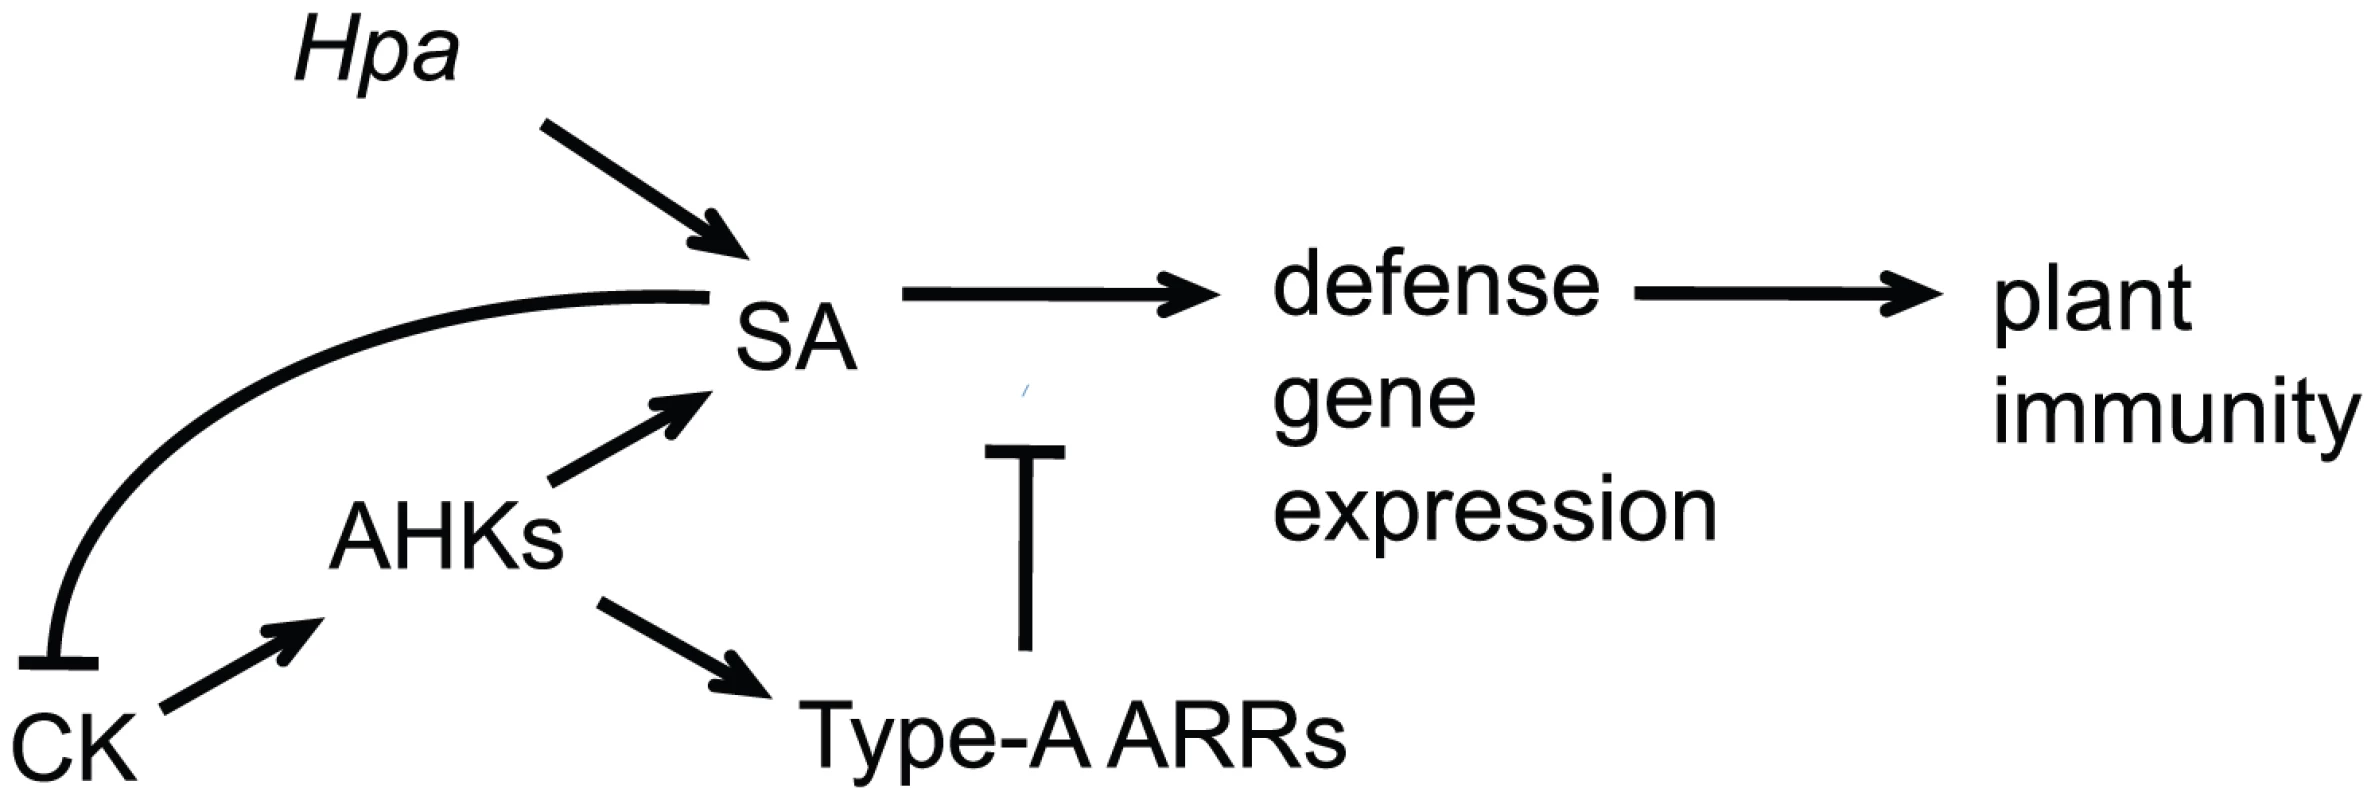 Model for cytokinin and type-A ARRs action in plant immunity.